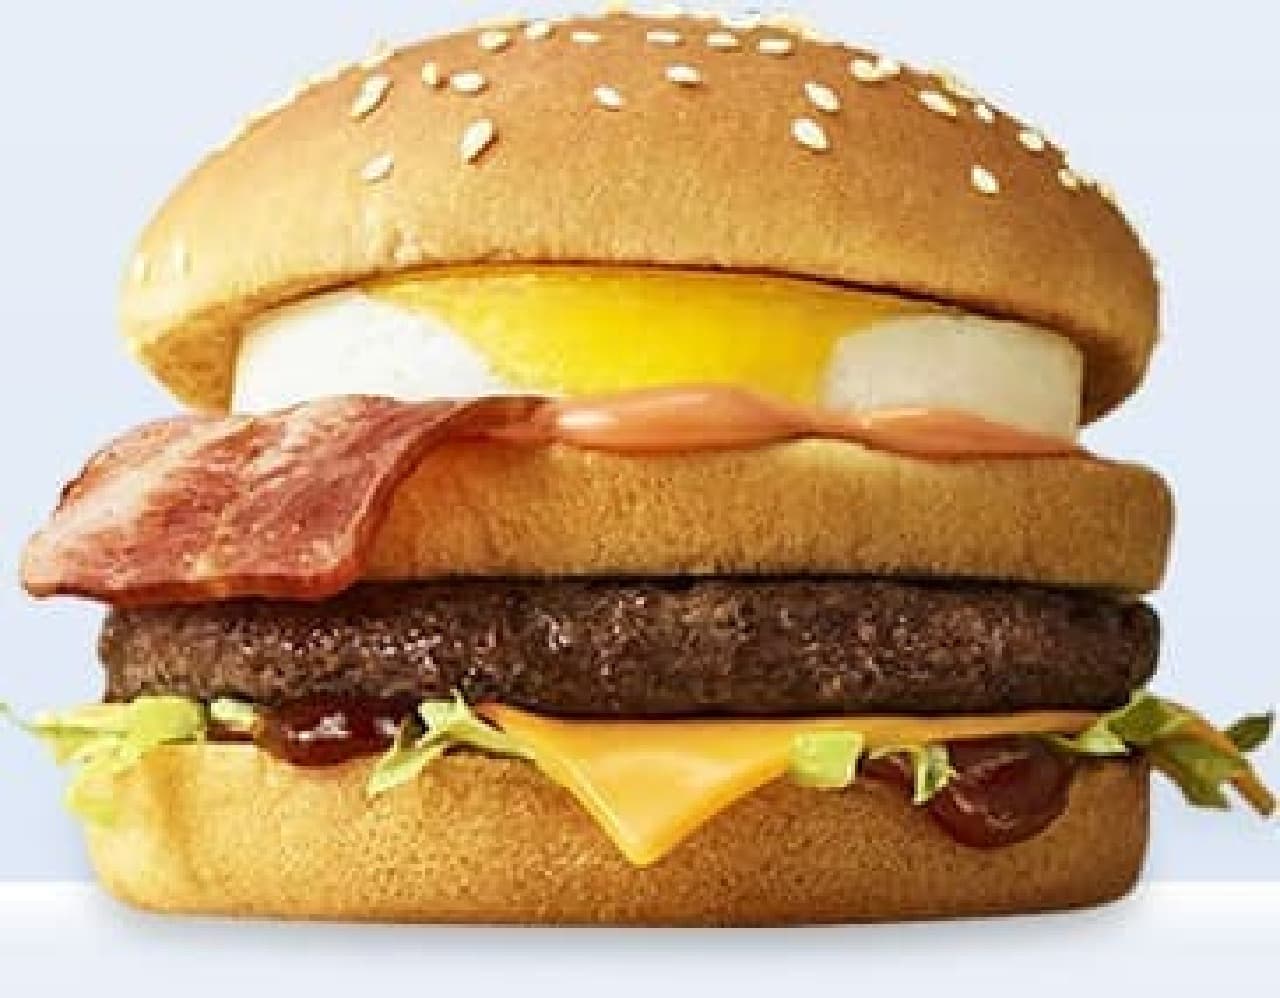 "Deluxe barbecue" with 8 kinds of ingredients for McDonald's